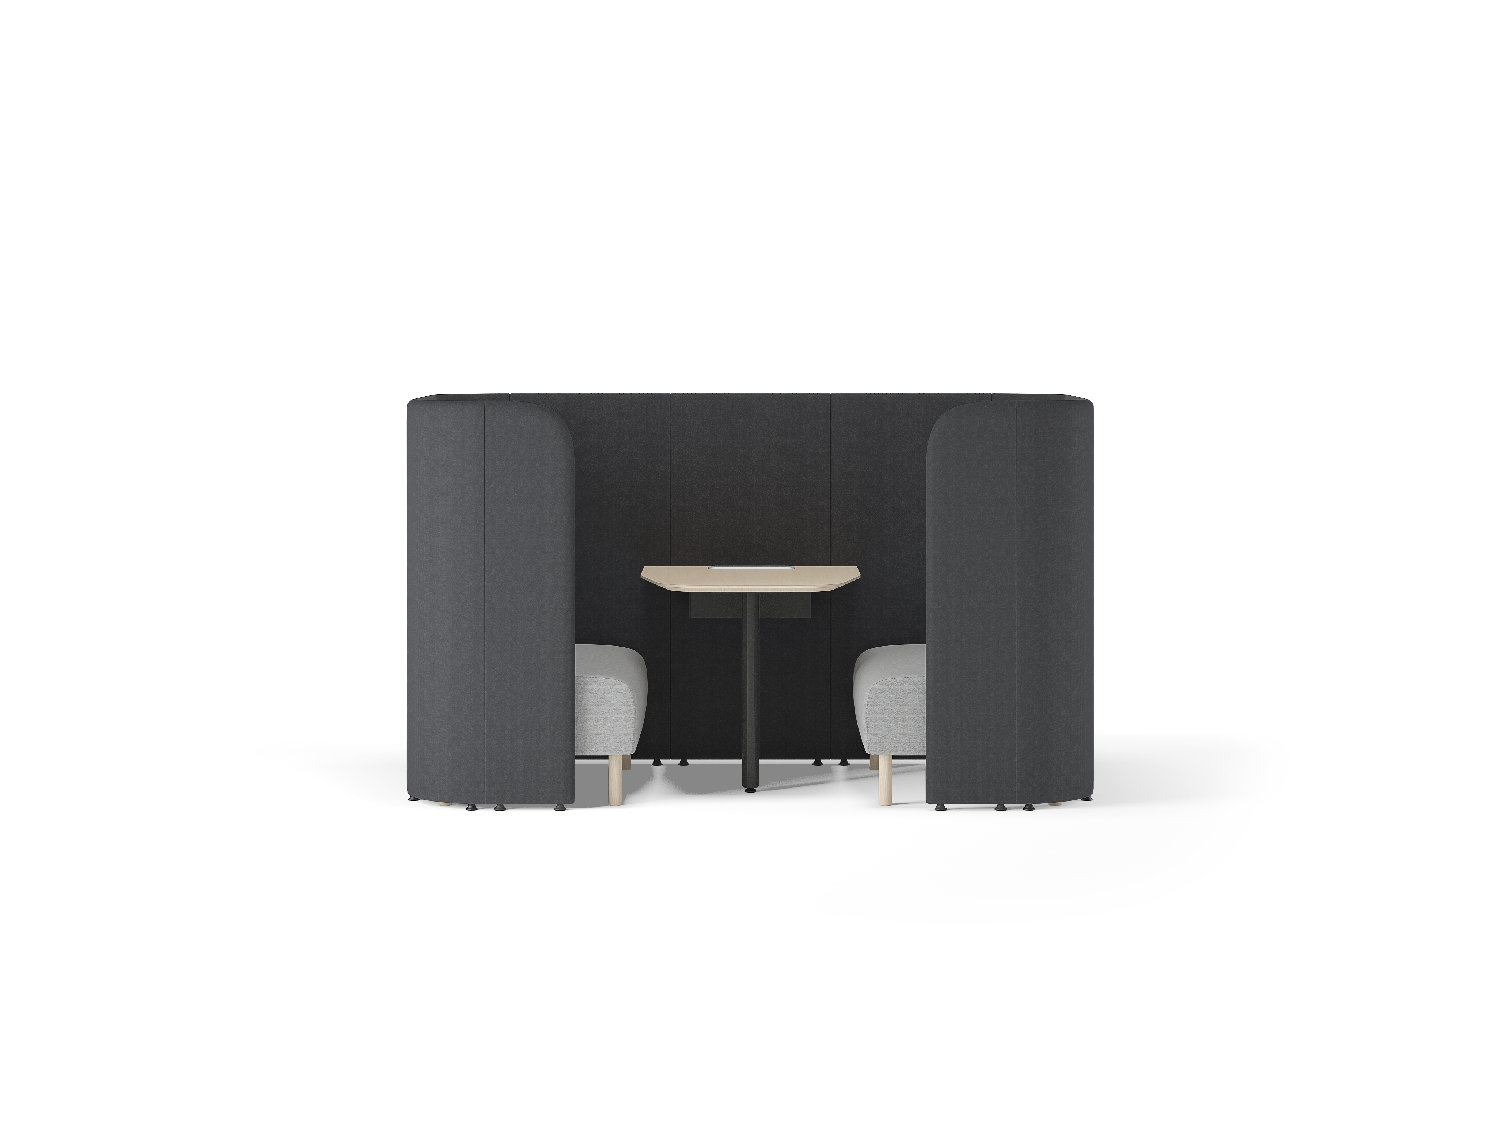 Matic Degree Office Furniture Gallery